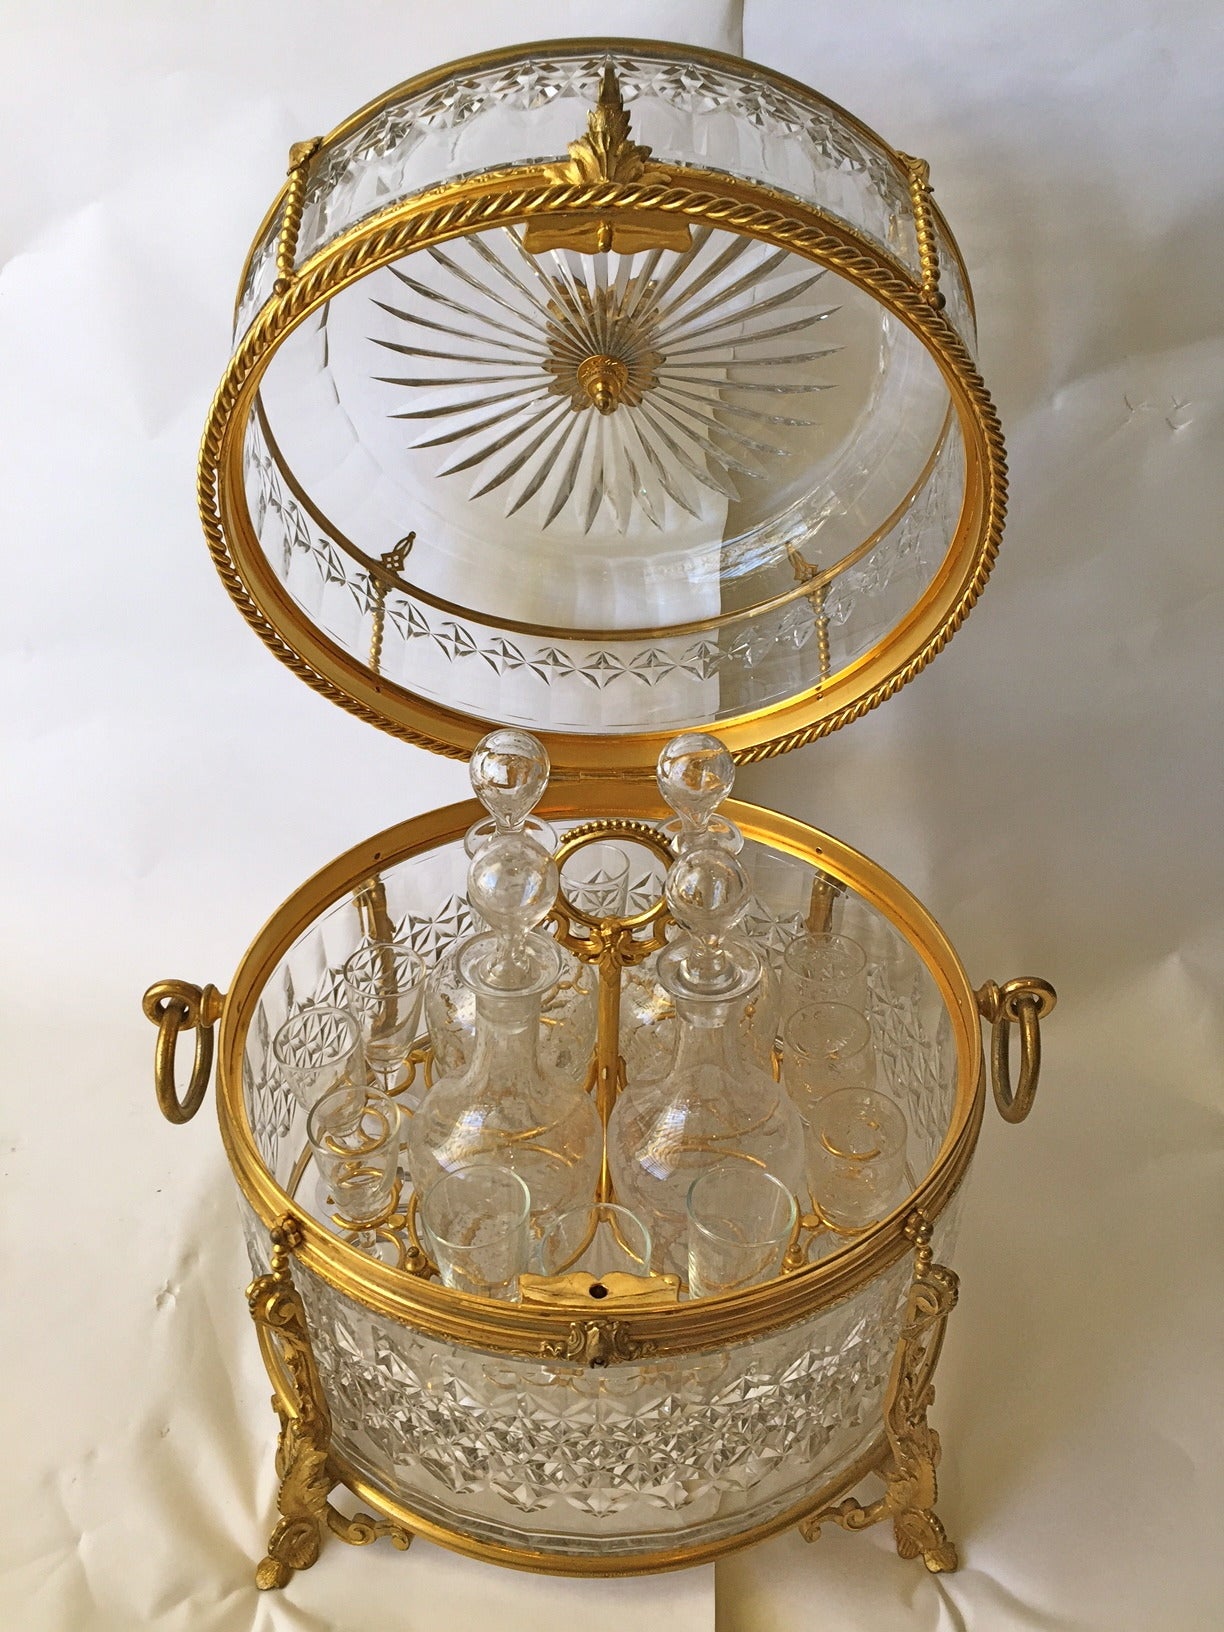 This is a beautiful Tantalus gilt bronze and crystal in excellent condition the crystal cut and mounted in finley cast gilt bronze. The glassware complete
and in excellent condition as well. 16 glasses four bottles and the gilt mounted
box.